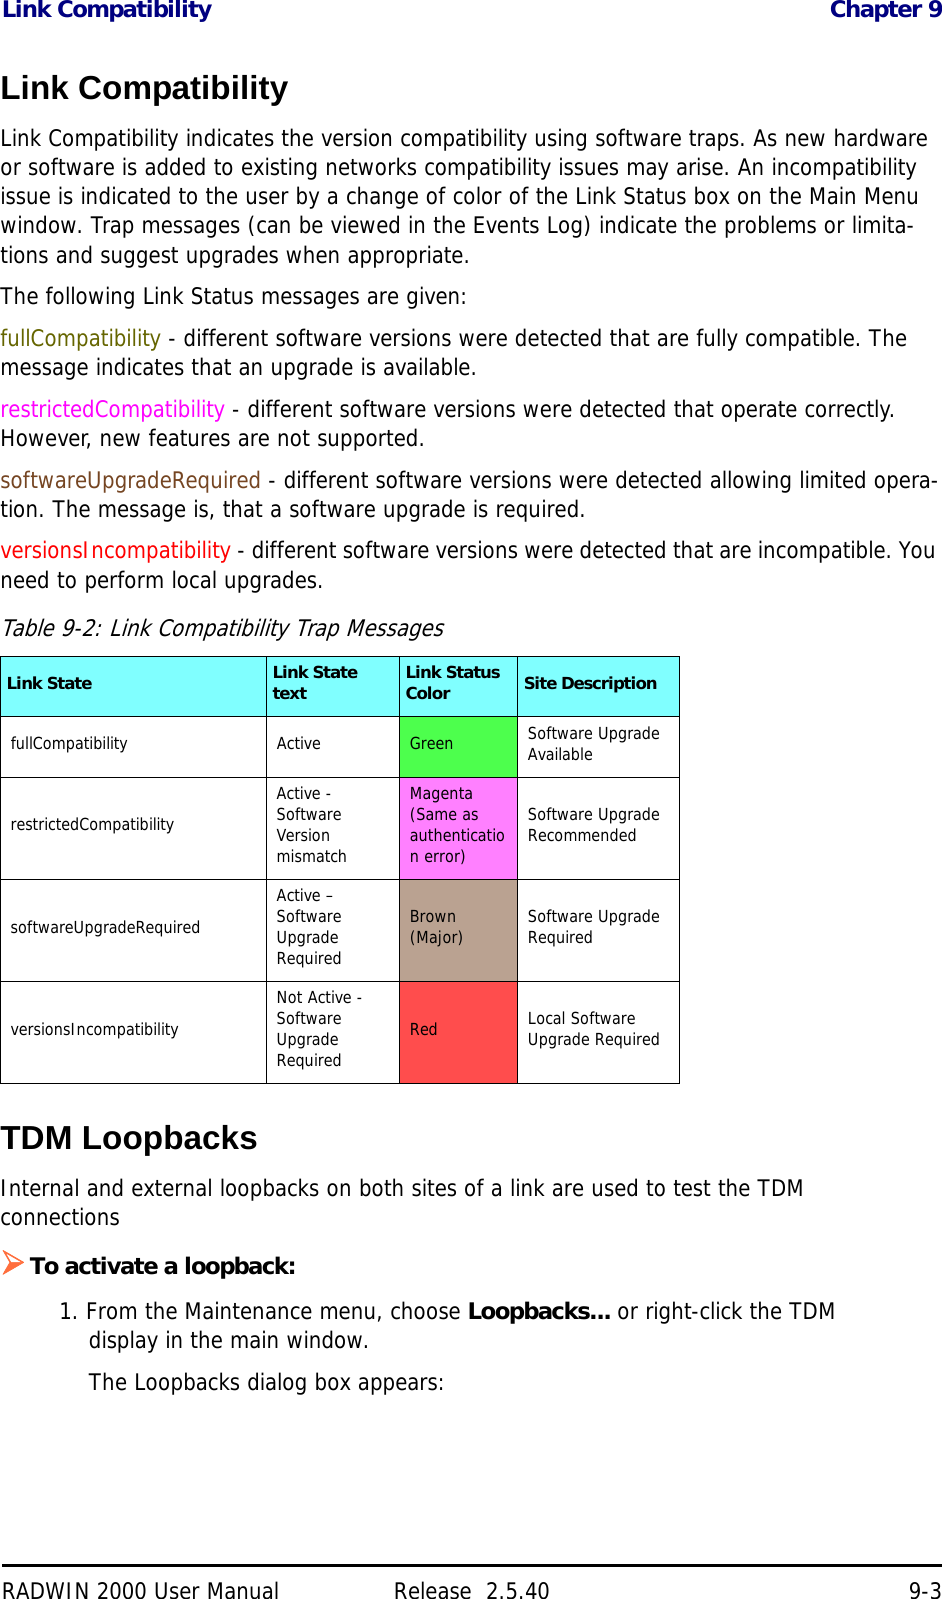 Link Compatibility Chapter 9RADWIN 2000 User Manual Release  2.5.40 9-3Link CompatibilityLink Compatibility indicates the version compatibility using software traps. As new hardware or software is added to existing networks compatibility issues may arise. An incompatibility issue is indicated to the user by a change of color of the Link Status box on the Main Menu window. Trap messages (can be viewed in the Events Log) indicate the problems or limita-tions and suggest upgrades when appropriate.The following Link Status messages are given:fullCompatibility - different software versions were detected that are fully compatible. The message indicates that an upgrade is available.restrictedCompatibility - different software versions were detected that operate correctly. However, new features are not supported.softwareUpgradeRequired - different software versions were detected allowing limited opera-tion. The message is, that a software upgrade is required.versionsIncompatibility - different software versions were detected that are incompatible. You need to perform local upgrades.TDM LoopbacksInternal and external loopbacks on both sites of a link are used to test the TDM connectionsTo activate a loopback:1. From the Maintenance menu, choose Loopbacks... or right-click the TDM display in the main window.The Loopbacks dialog box appears:Table 9-2: Link Compatibility Trap MessagesLink State Link State text Link Status Color Site DescriptionfullCompatibility Active Green Software Upgrade AvailablerestrictedCompatibilityActive - Software Version mismatchMagenta (Same as authentication error)Software Upgrade RecommendedsoftwareUpgradeRequiredActive – Software Upgrade RequiredBrown (Major) Software Upgrade RequiredversionsIncompatibilityNot Active - Software Upgrade RequiredRed Local Software Upgrade Required